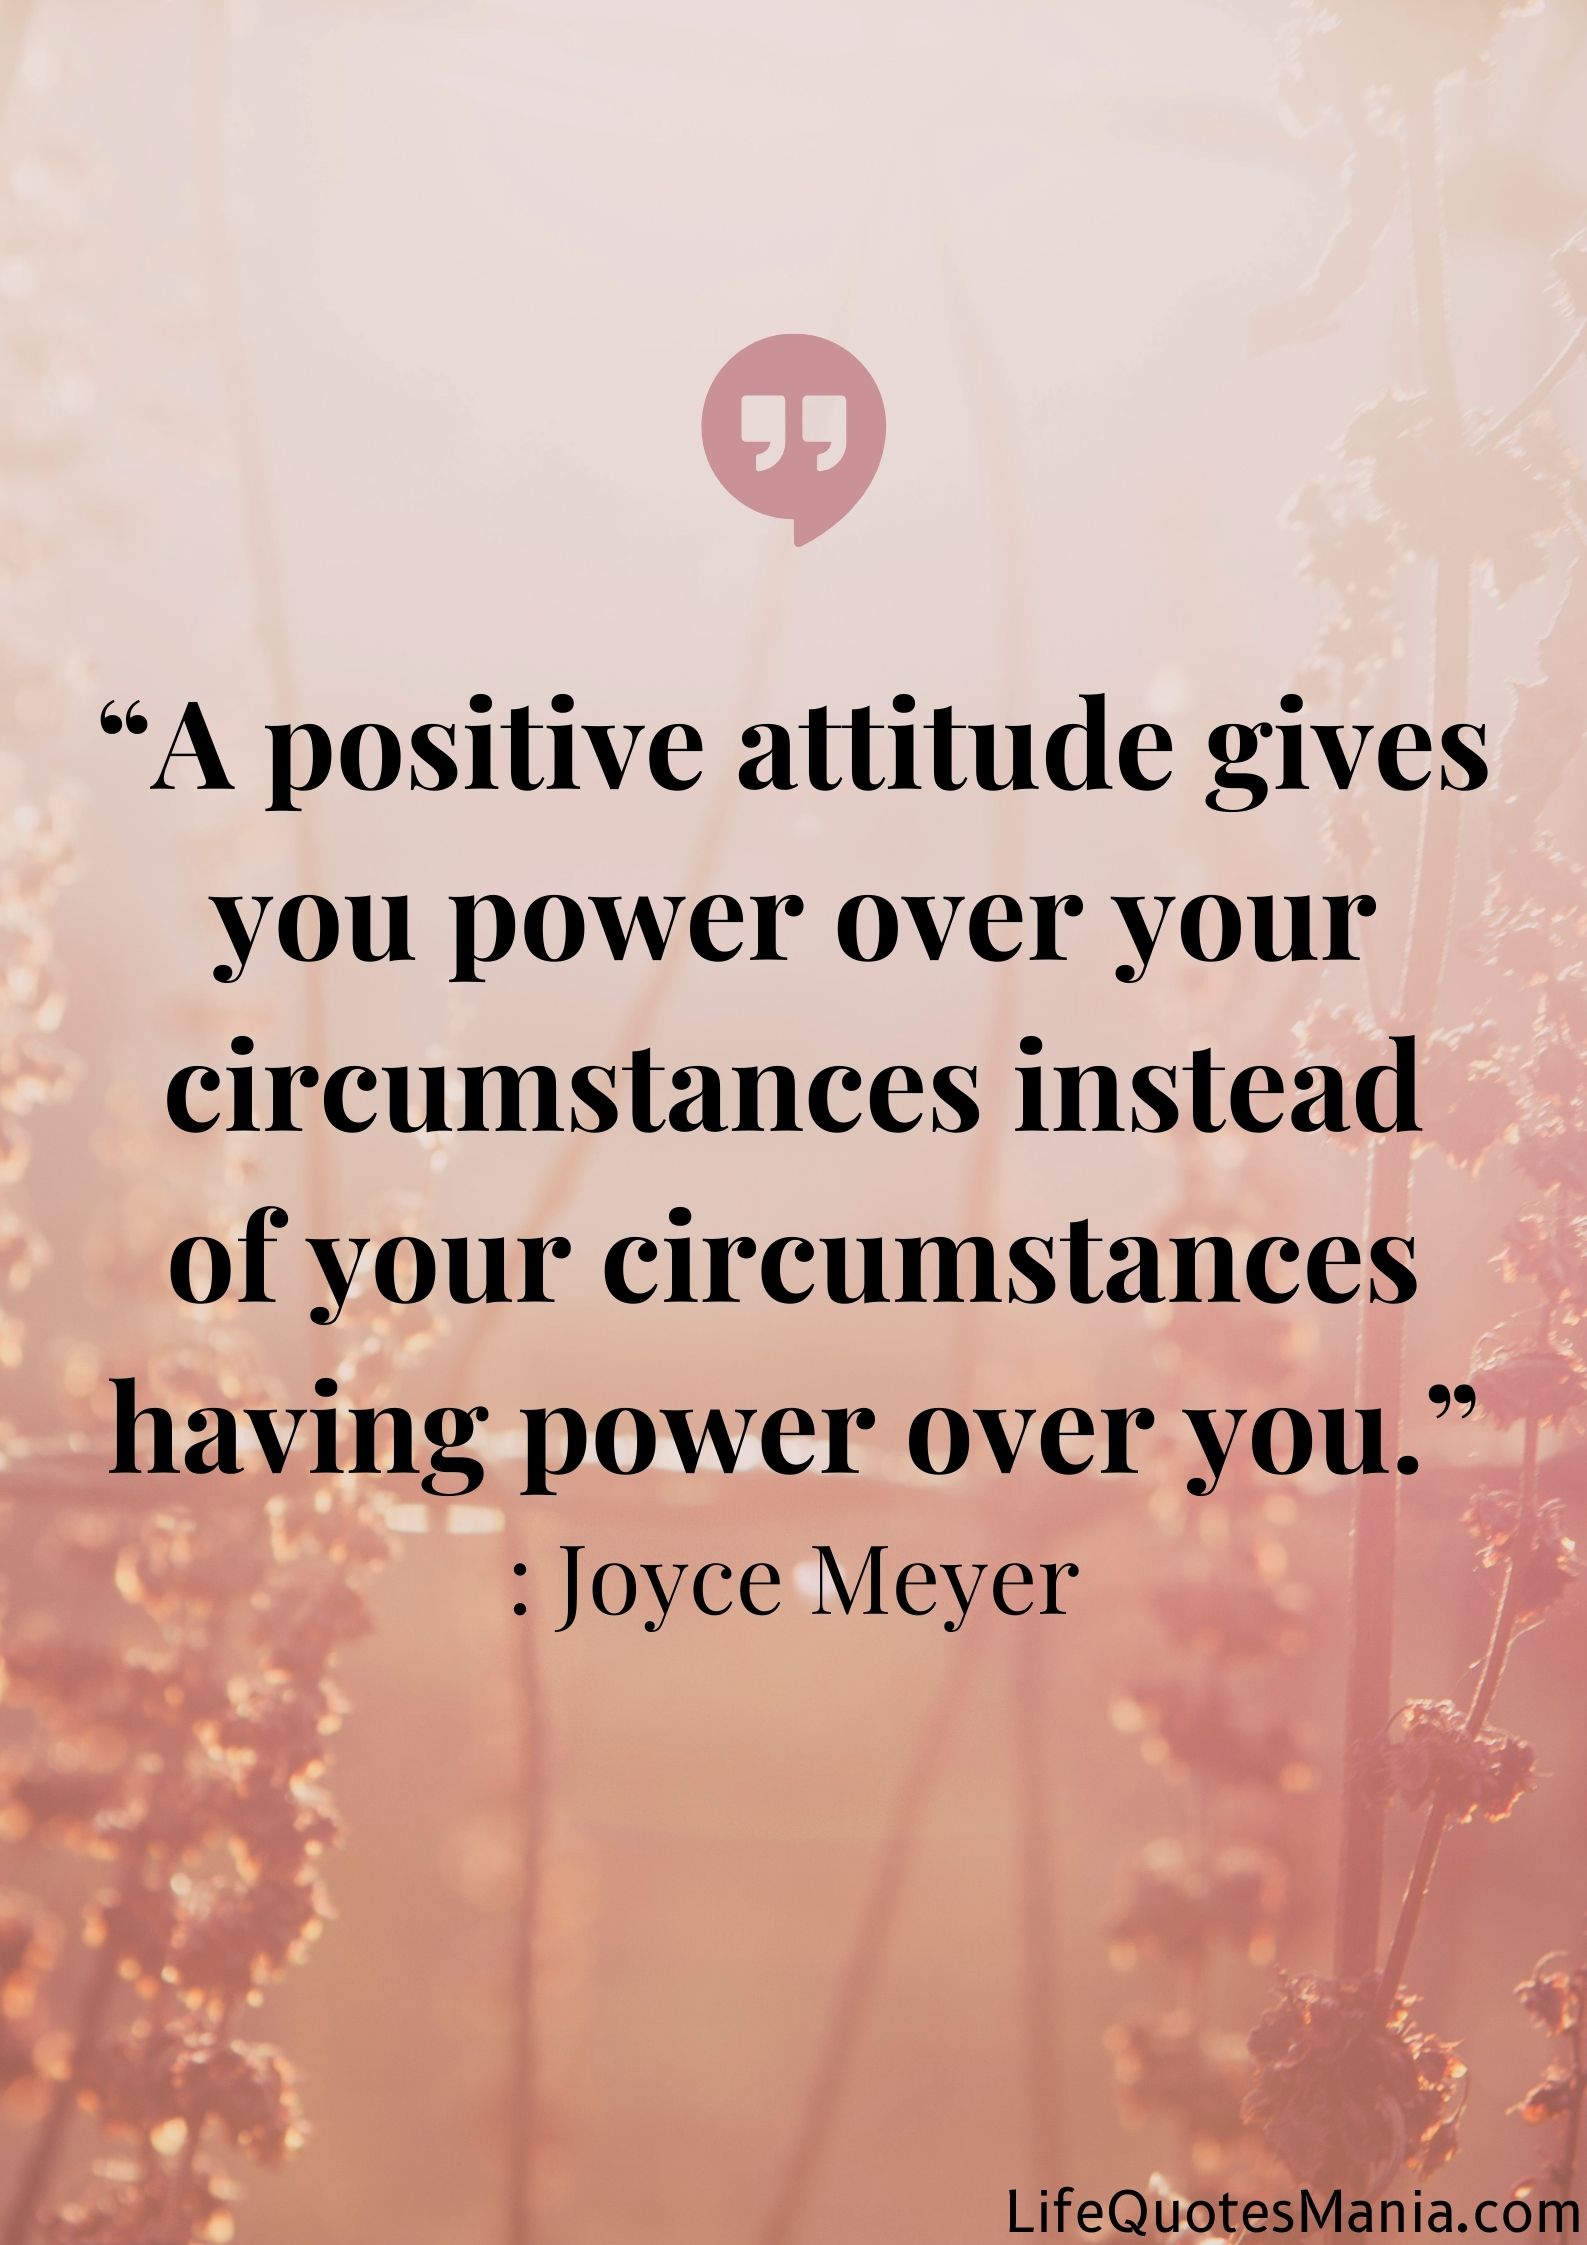 Anxiety Quotes - Joyce Meyer